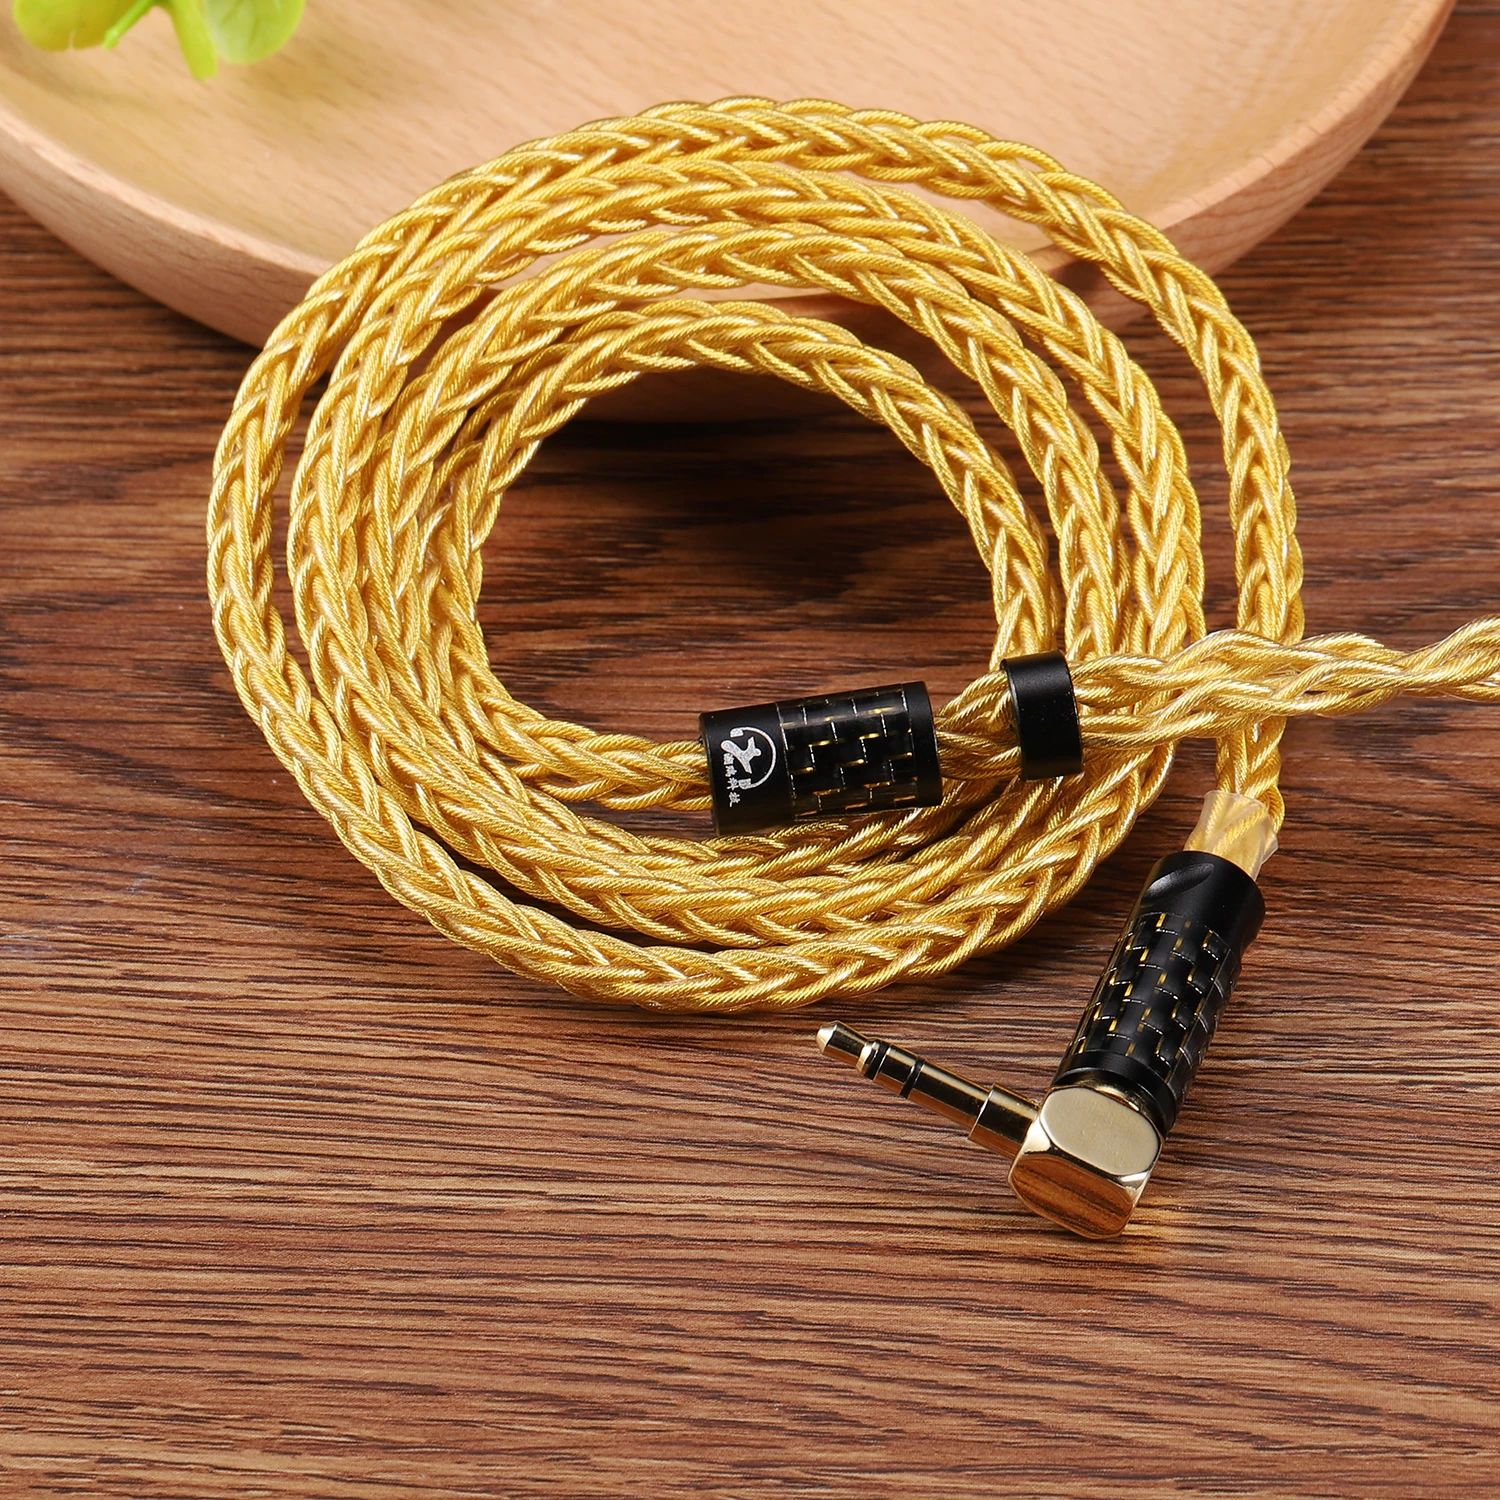 6Nocc Single crystal Copper plated with 18K gold 2.5mm 3.5mm 4.4mm Earphone Upgrade Cable IM04 IM70 MMCX 0.78cm QDC IE80S